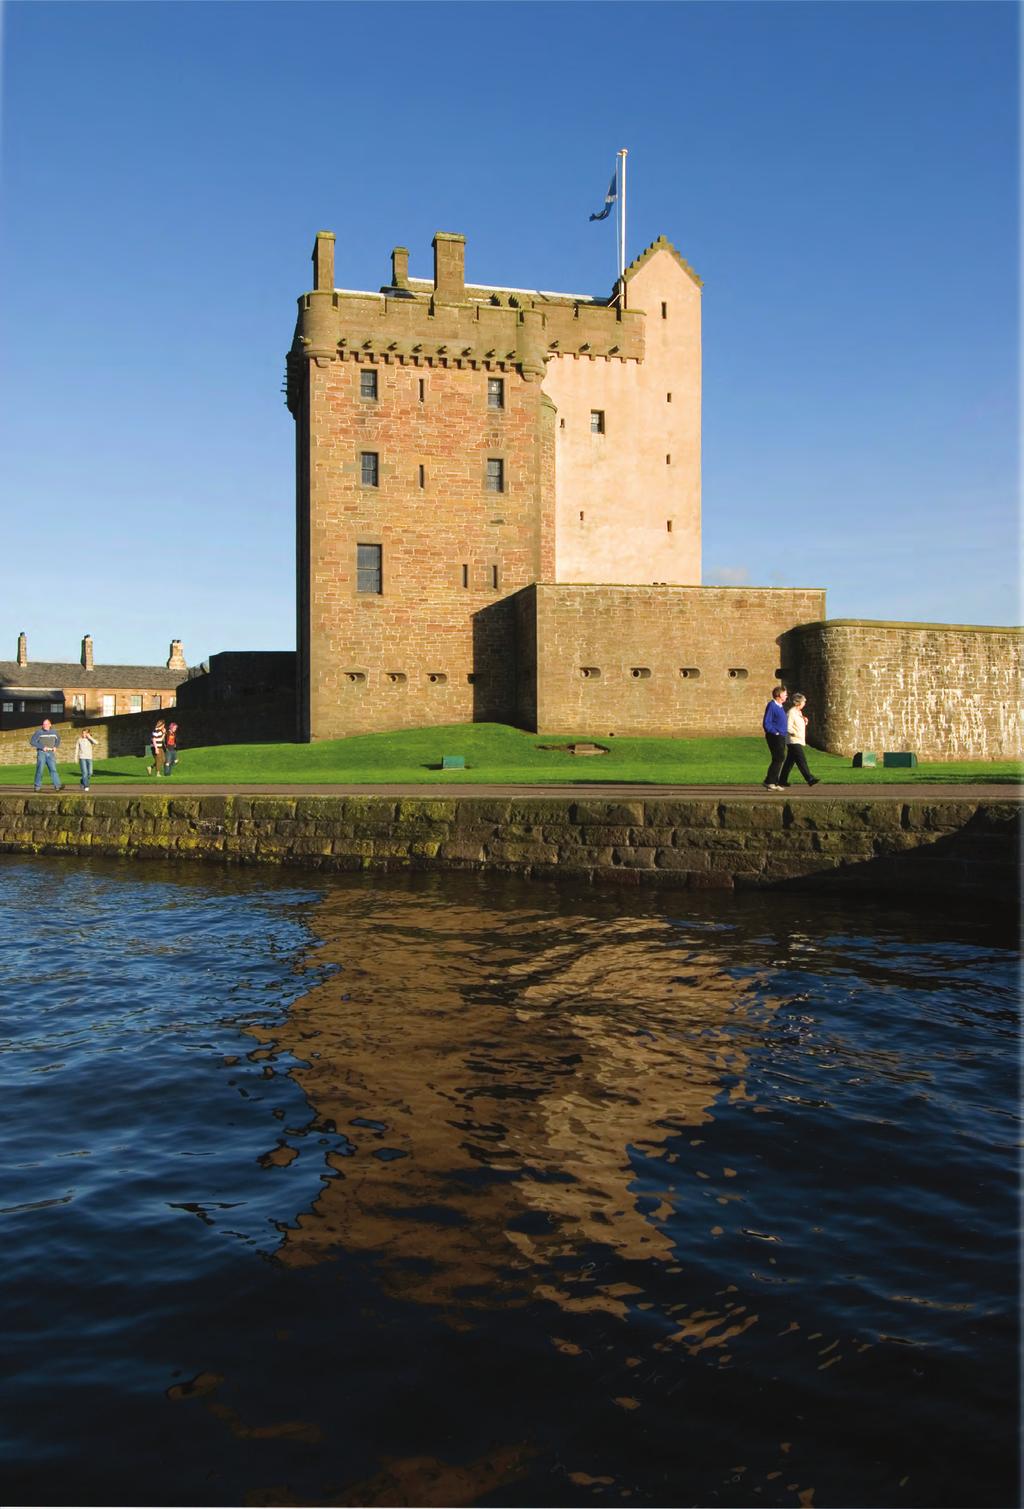 SHOP AT THE MCMANUS, BROUGHTY CASTLE AND MILLS OBSERVATORY BROUGHTY CASTLE MUSEUM GALLERY TALKS Looking for a special gift or a memento of your visit?